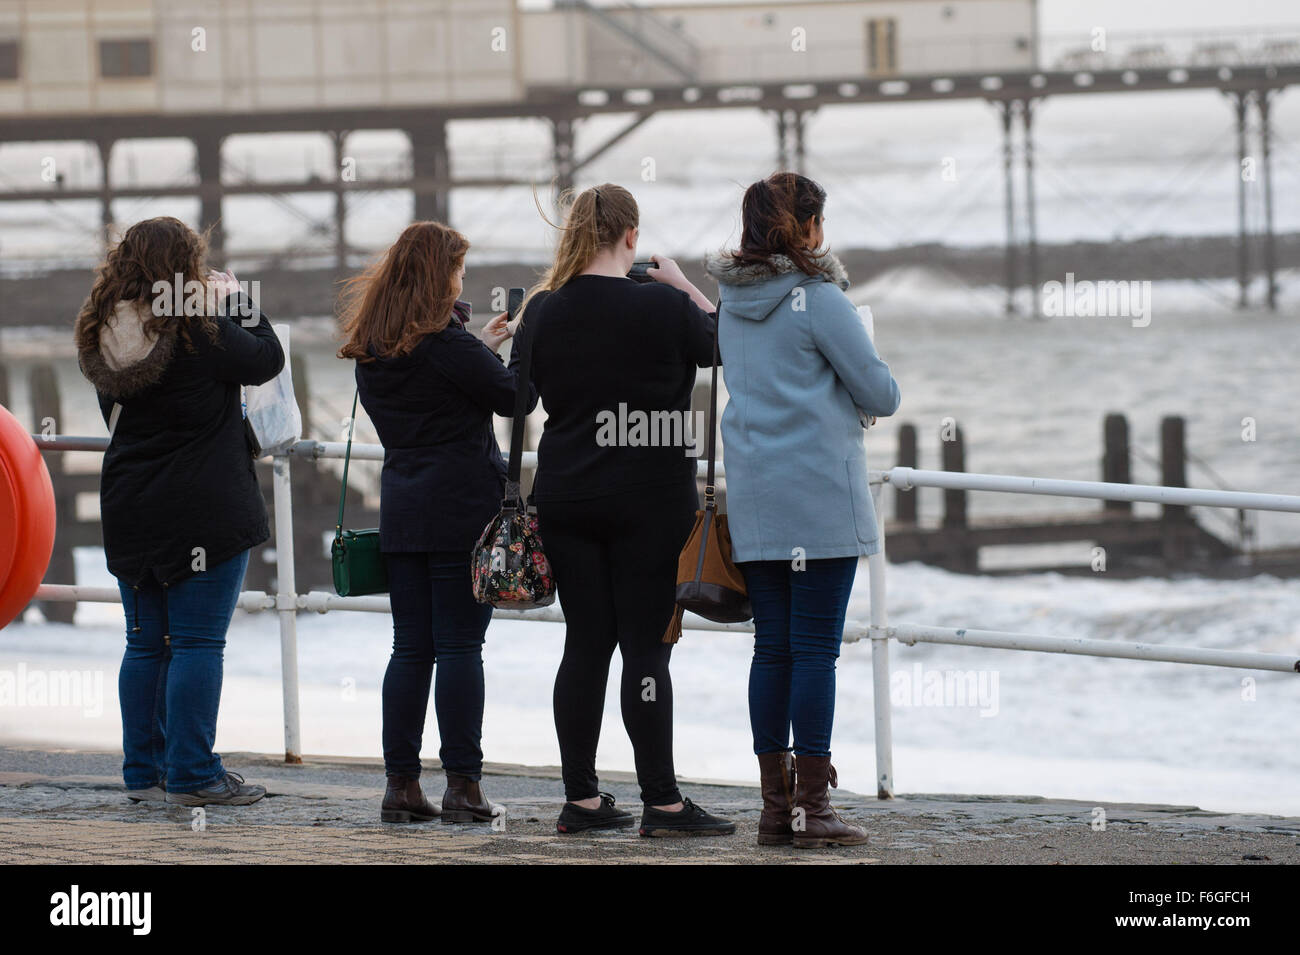 Aberystwyth Wales Uk, Tuesday 17 November 2015  UK weather: A group of young women photograph the waves as the second named storm of the season - Storm Barney - hits Aberystwyth on the west coast of Wales.    Gusts of wind were expected to reach 80mph over high ground, and heavy rain likely to cause  flooding in areas already saturated after days of rainfall    photo Credit:  Keith Morris / Alamy Live News Stock Photo